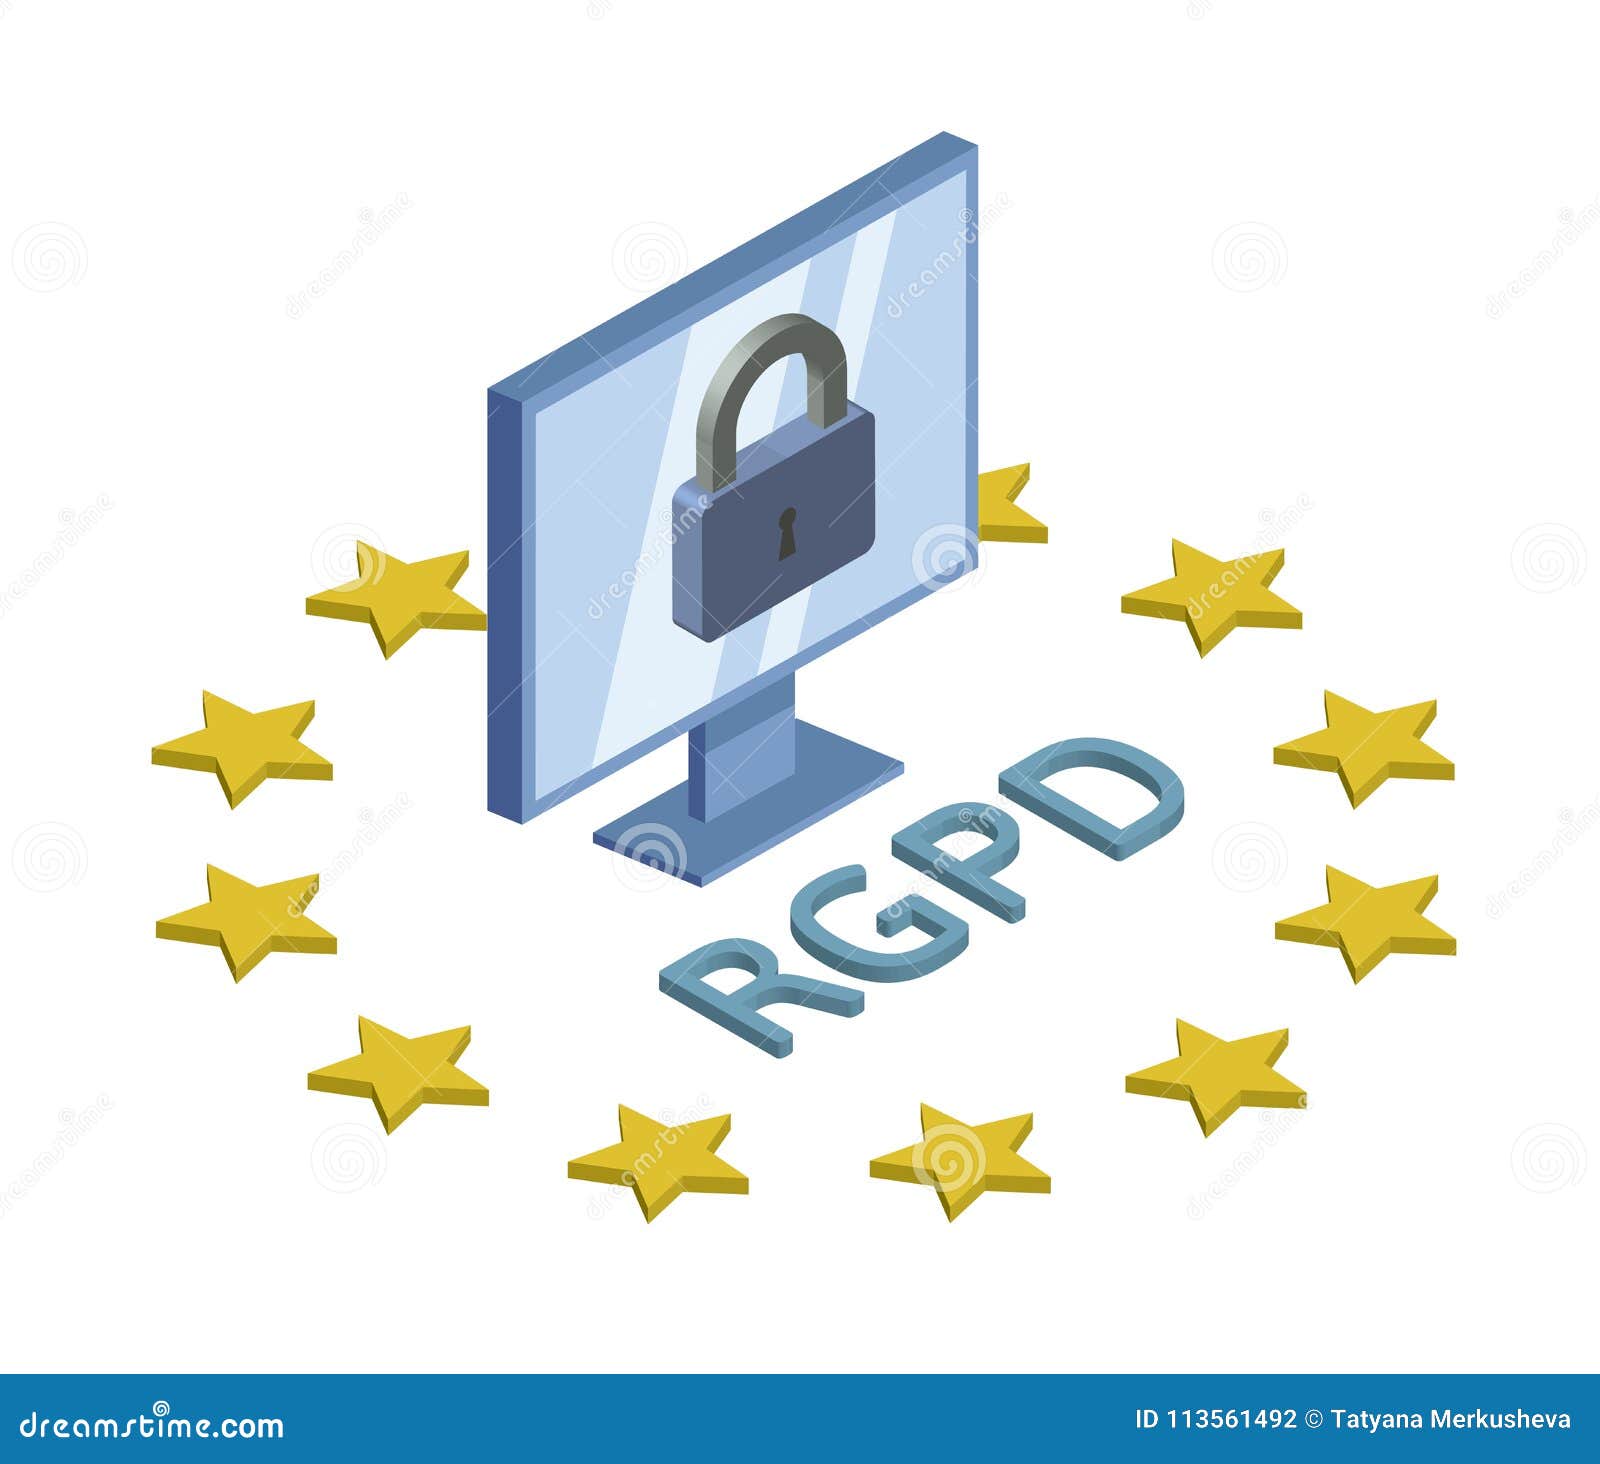 rgpd, spanish, french and italian version version of gdpr. general data protection regulation. concept isometric logo